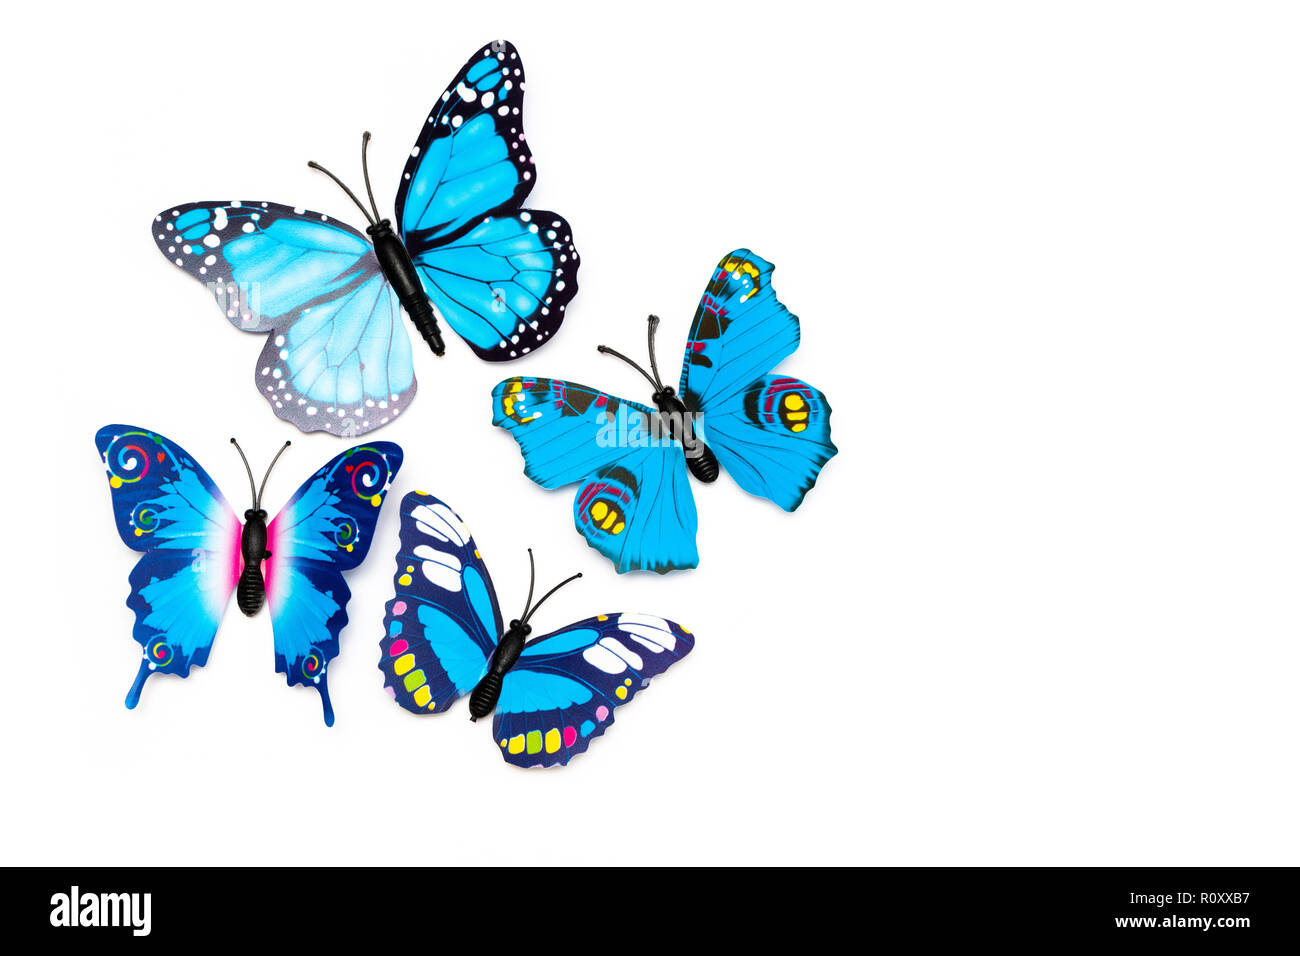 Group of multicolored tropical butterflies isolated on white background Stock Photo